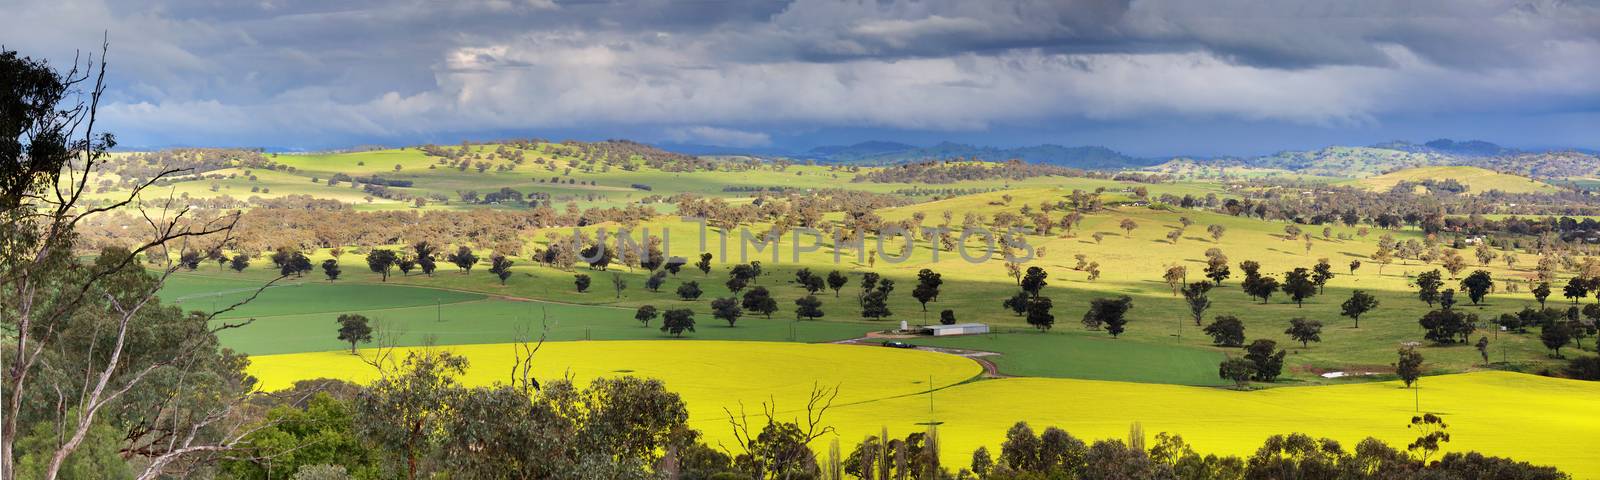 Fields of Canola and farmlands panorama by lovleah